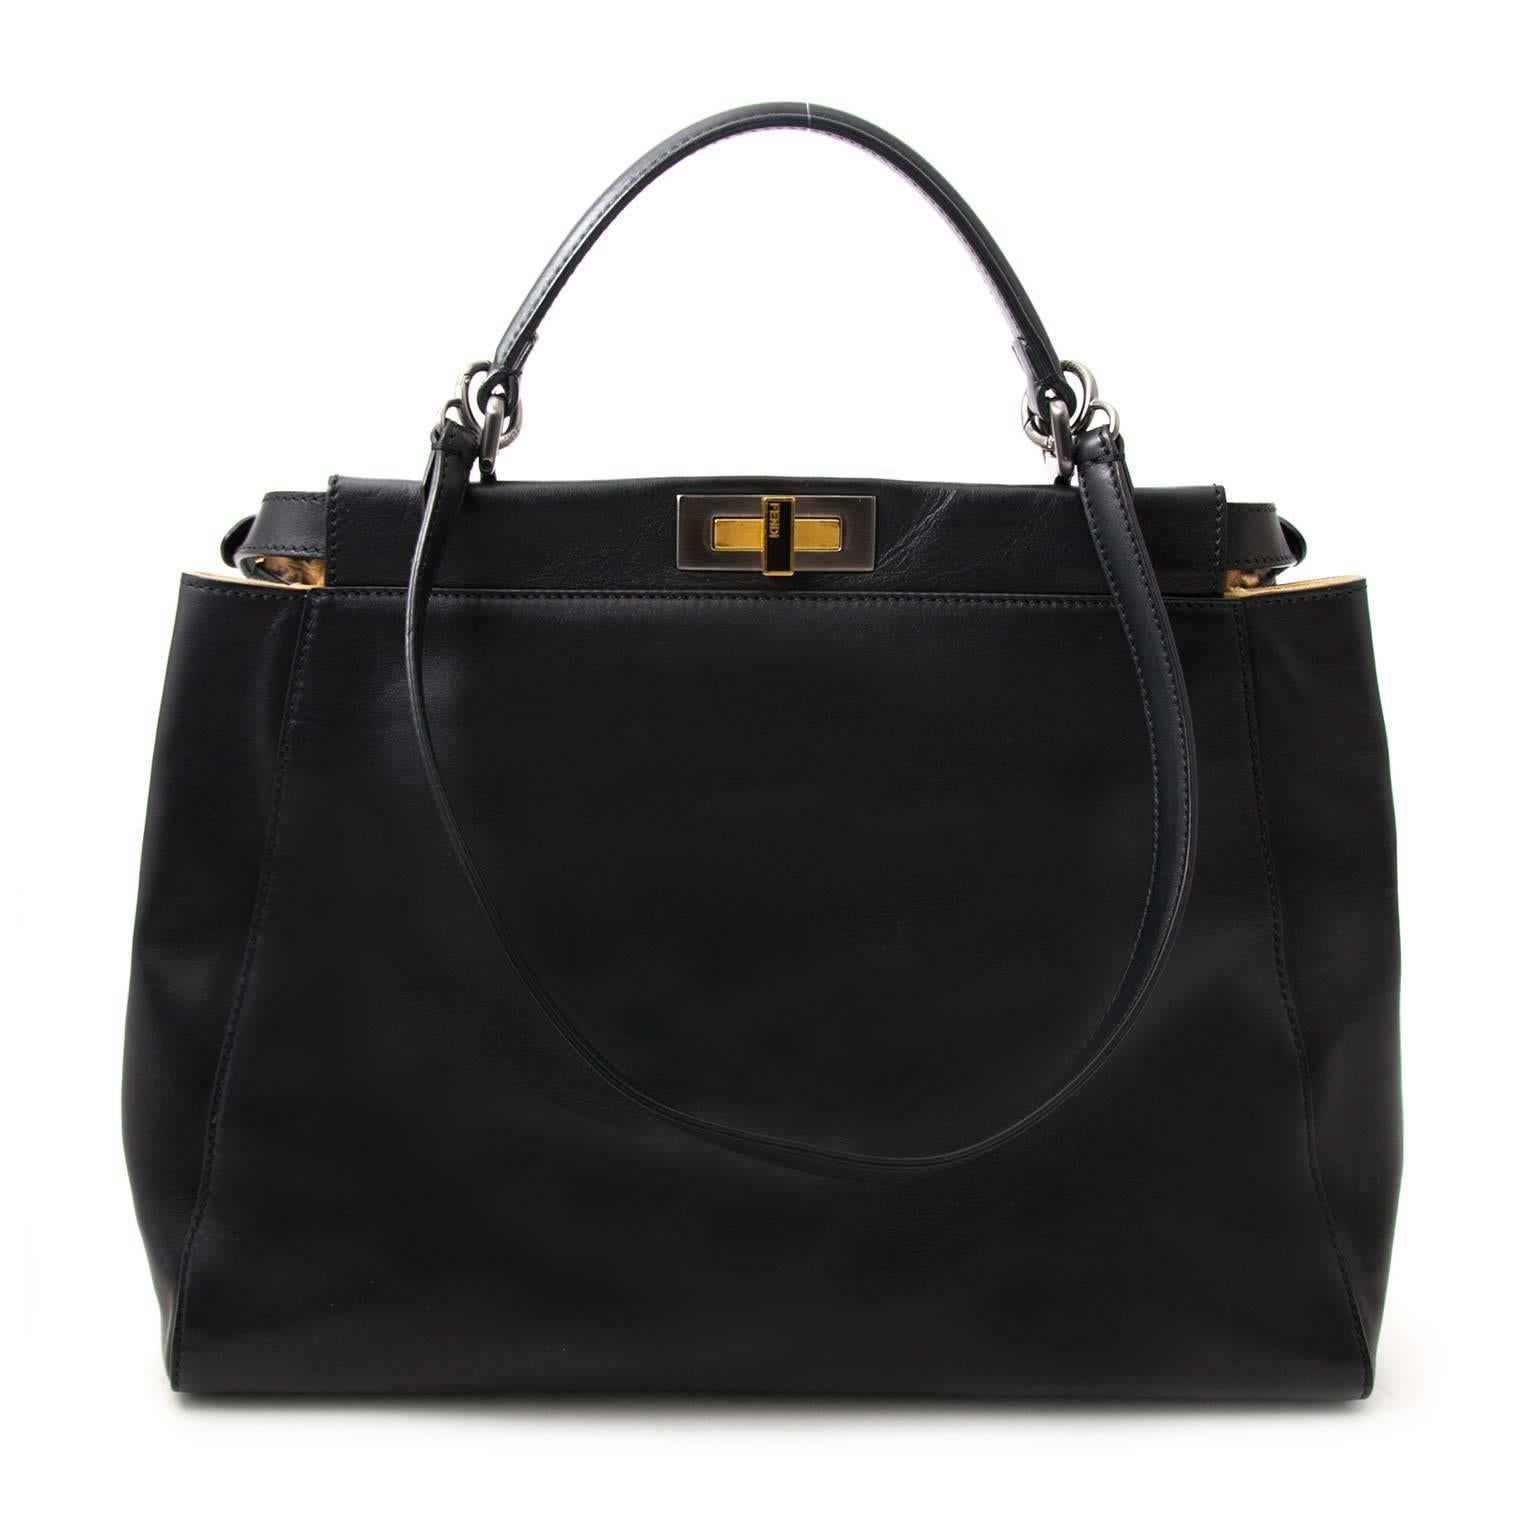 
Fendi Black Leopard-Lined Peekaboo Large Bag

Stand out from the rest with this eyecatching 